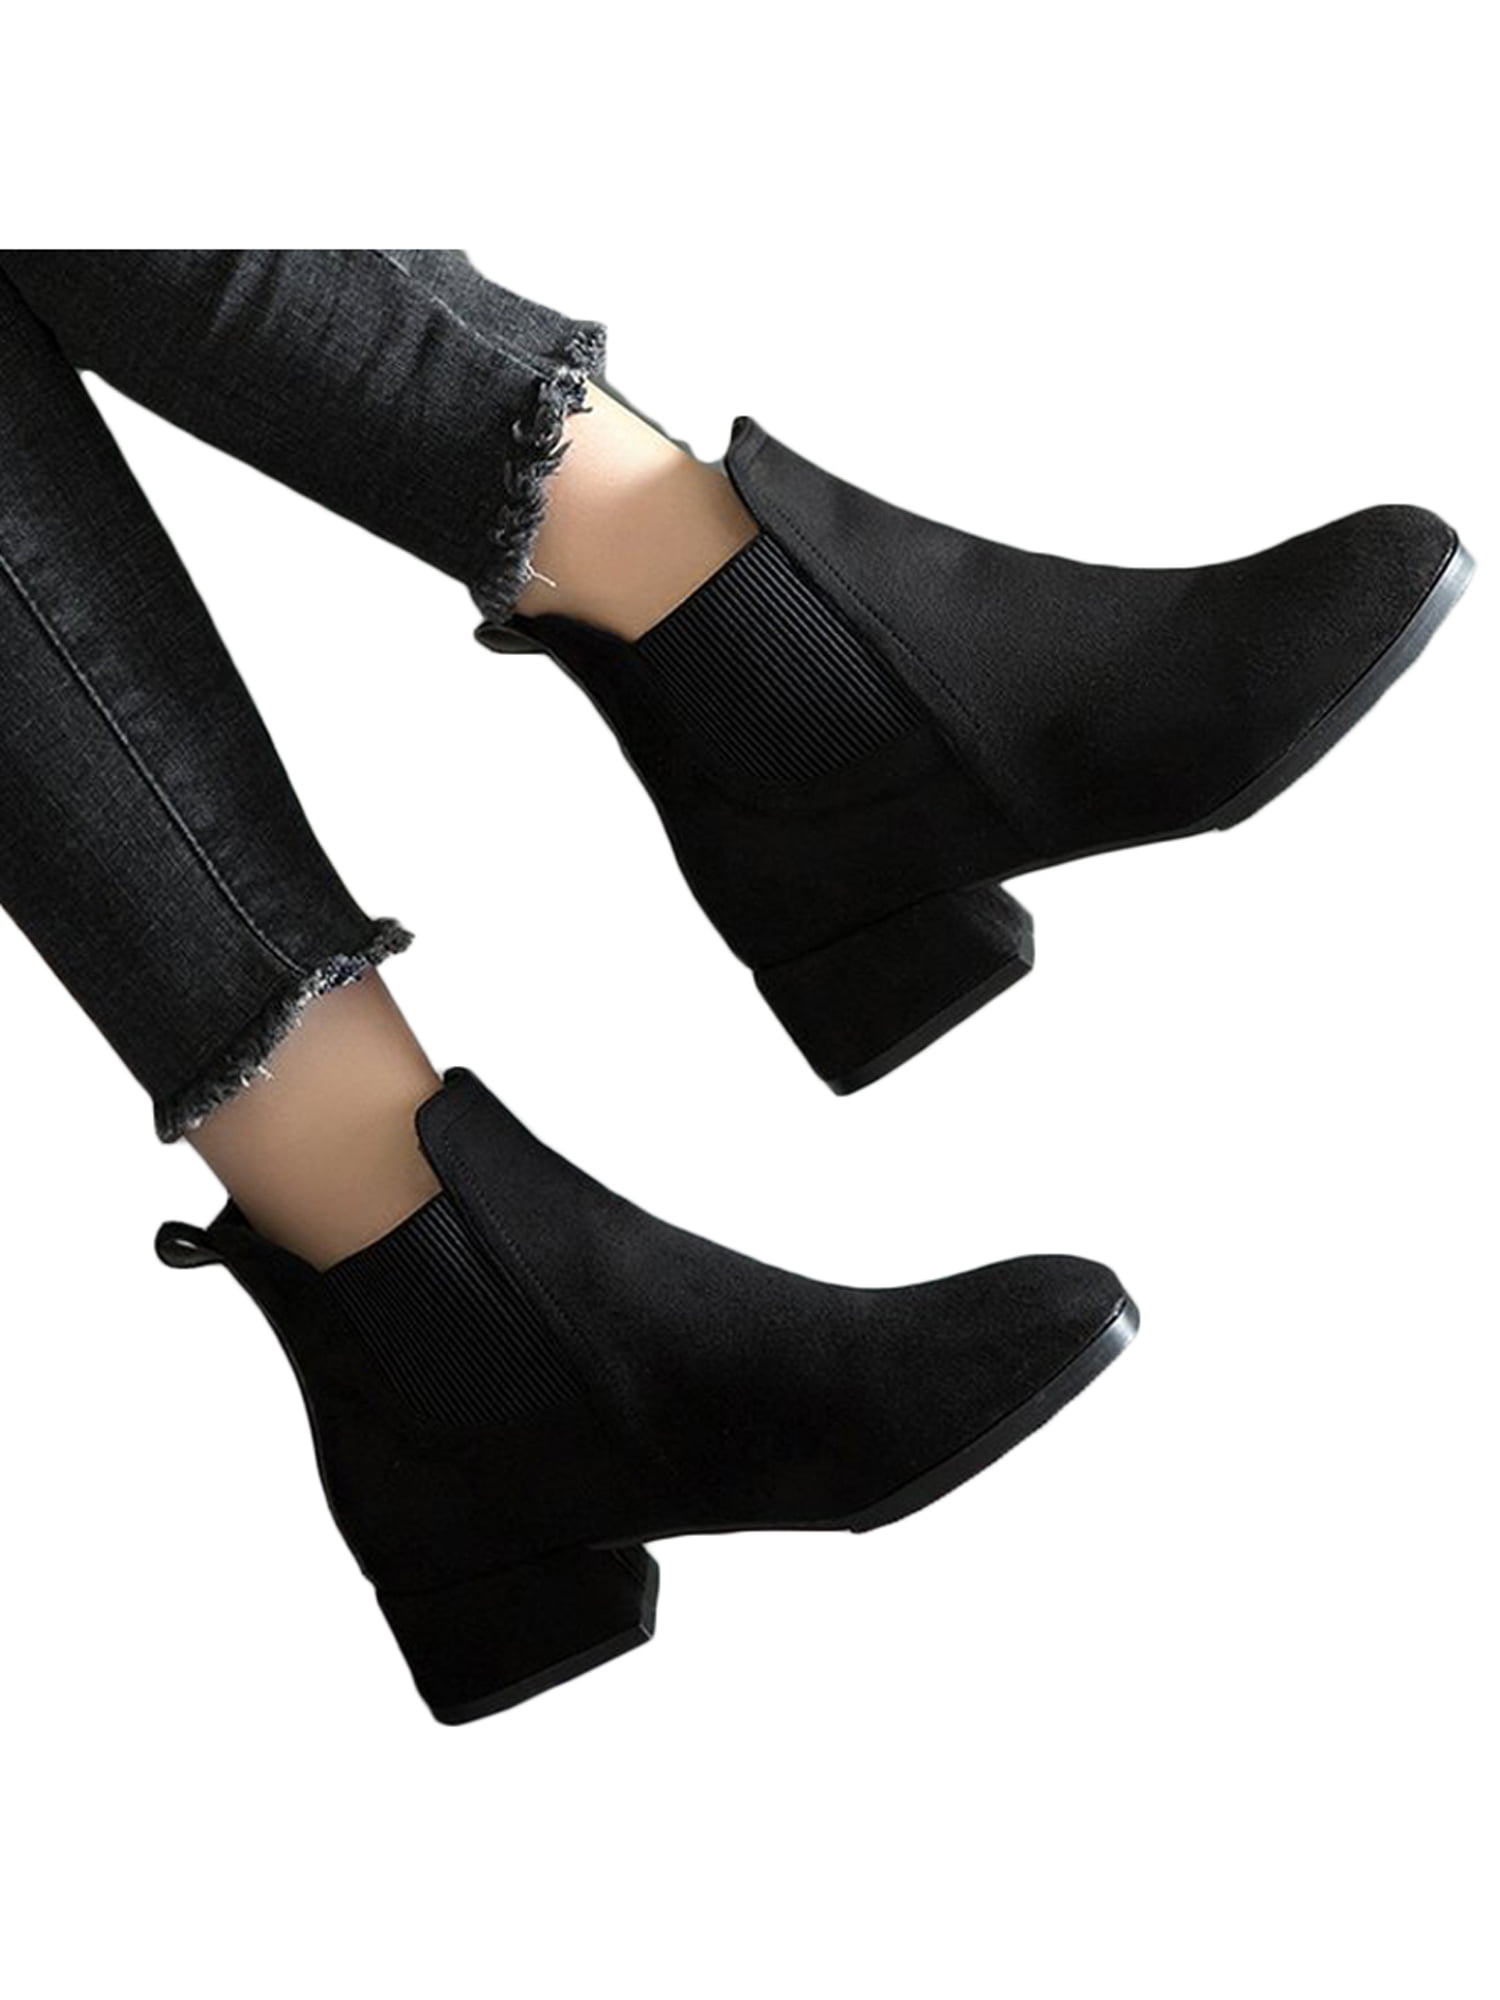 Womens Round Toe Flats Ankle Boots Ladies Low Block Heel Booties Shoes Sizes